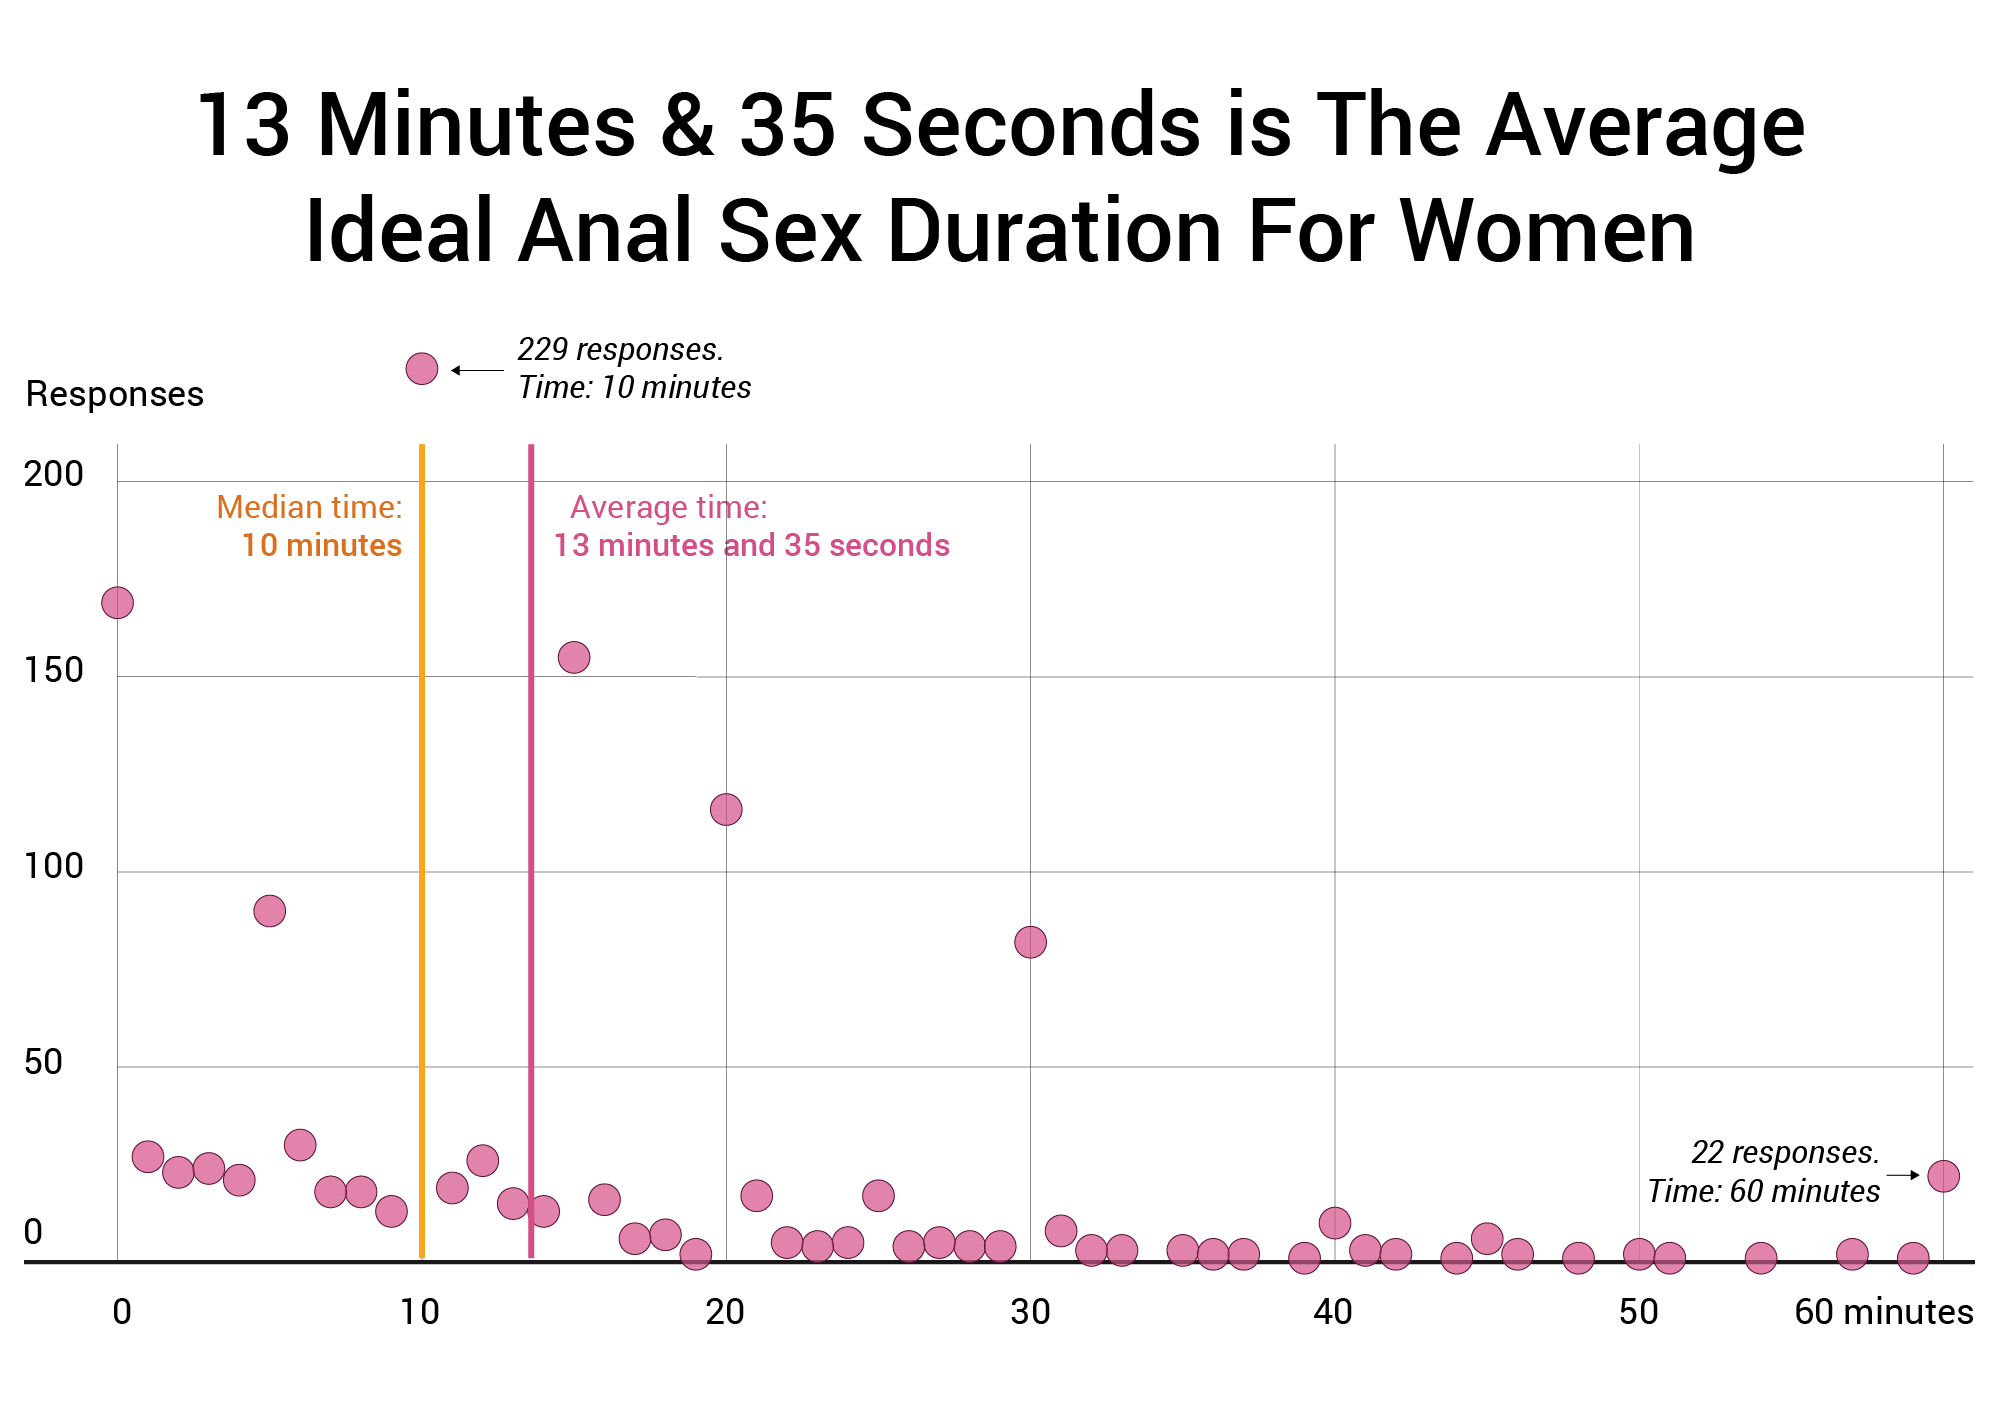 13 minutes and 35 seconds is the average ideal anal sex duration for women